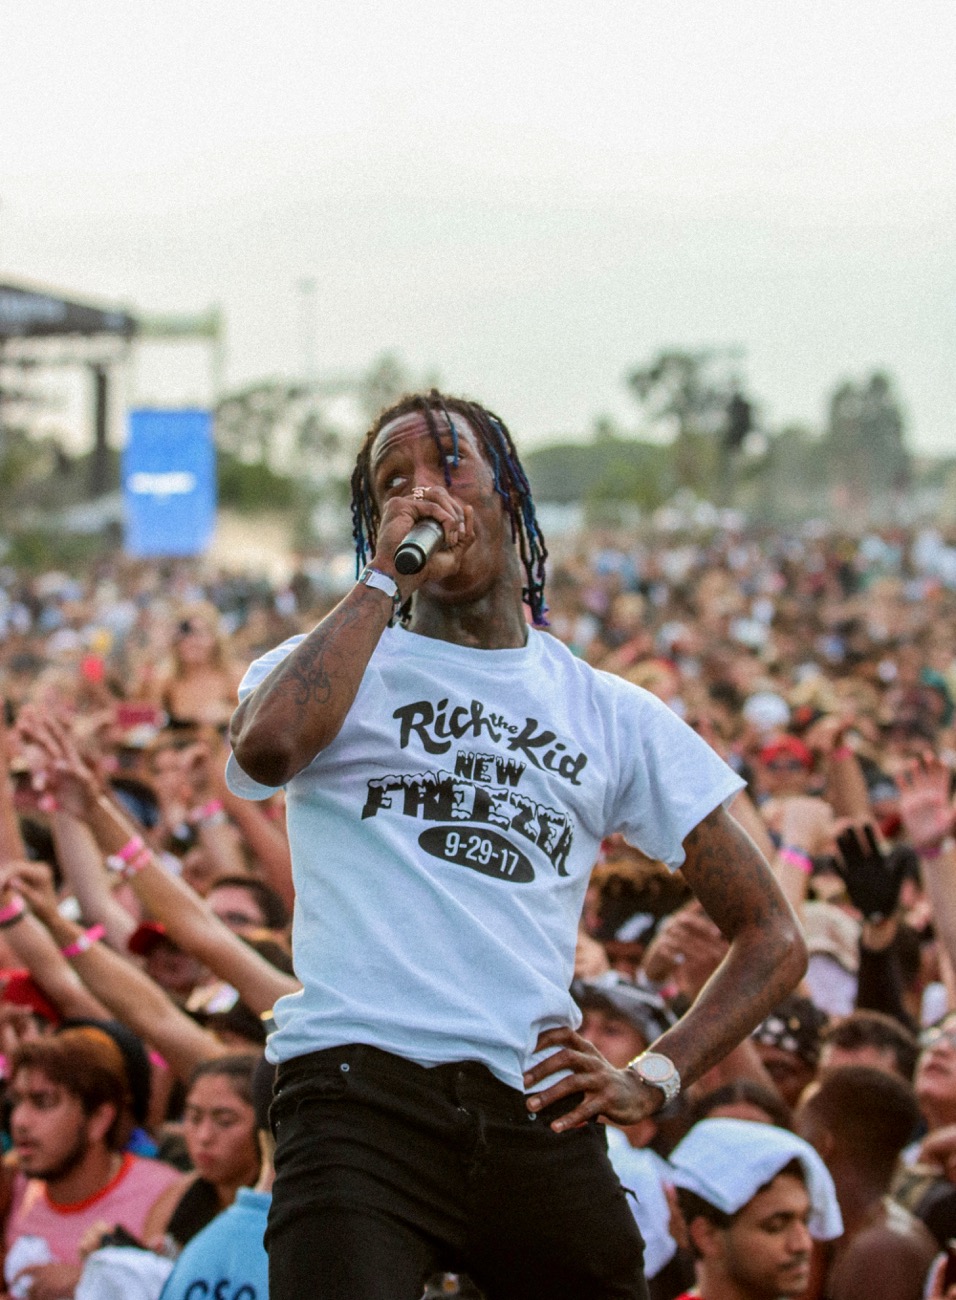 Rich The Kid X Famous Dex at DAY N NIGHT FEST @ Angel Stadium 9/10/17. Photo by Ghanee Ludin (@GhaneePhoto) for www.BlurredCulture.com.